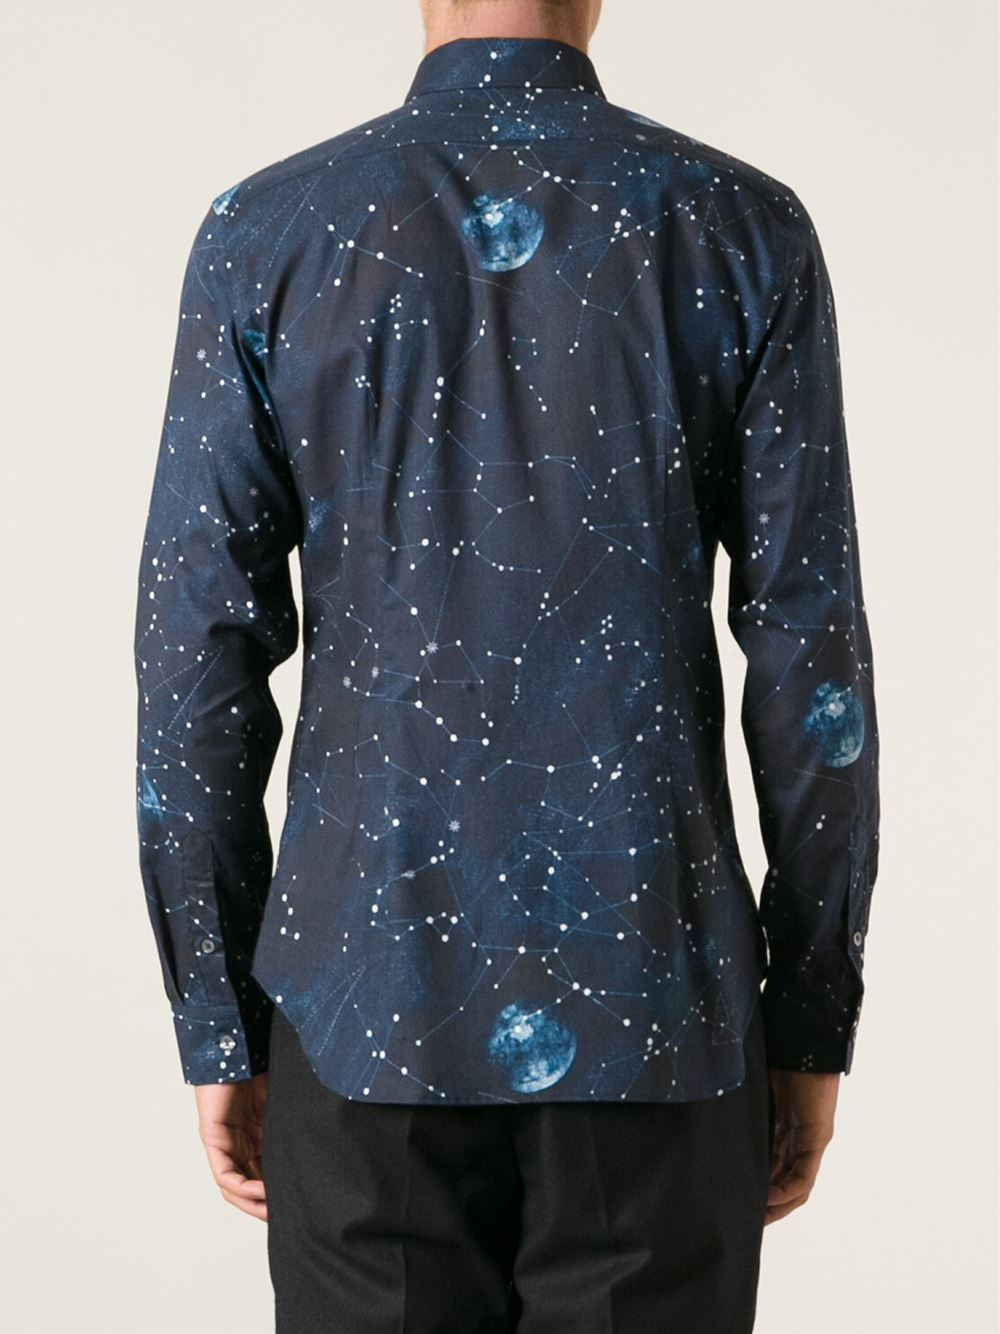 Paul Smith Constellation Print Shirt in Blue for Men - Lyst